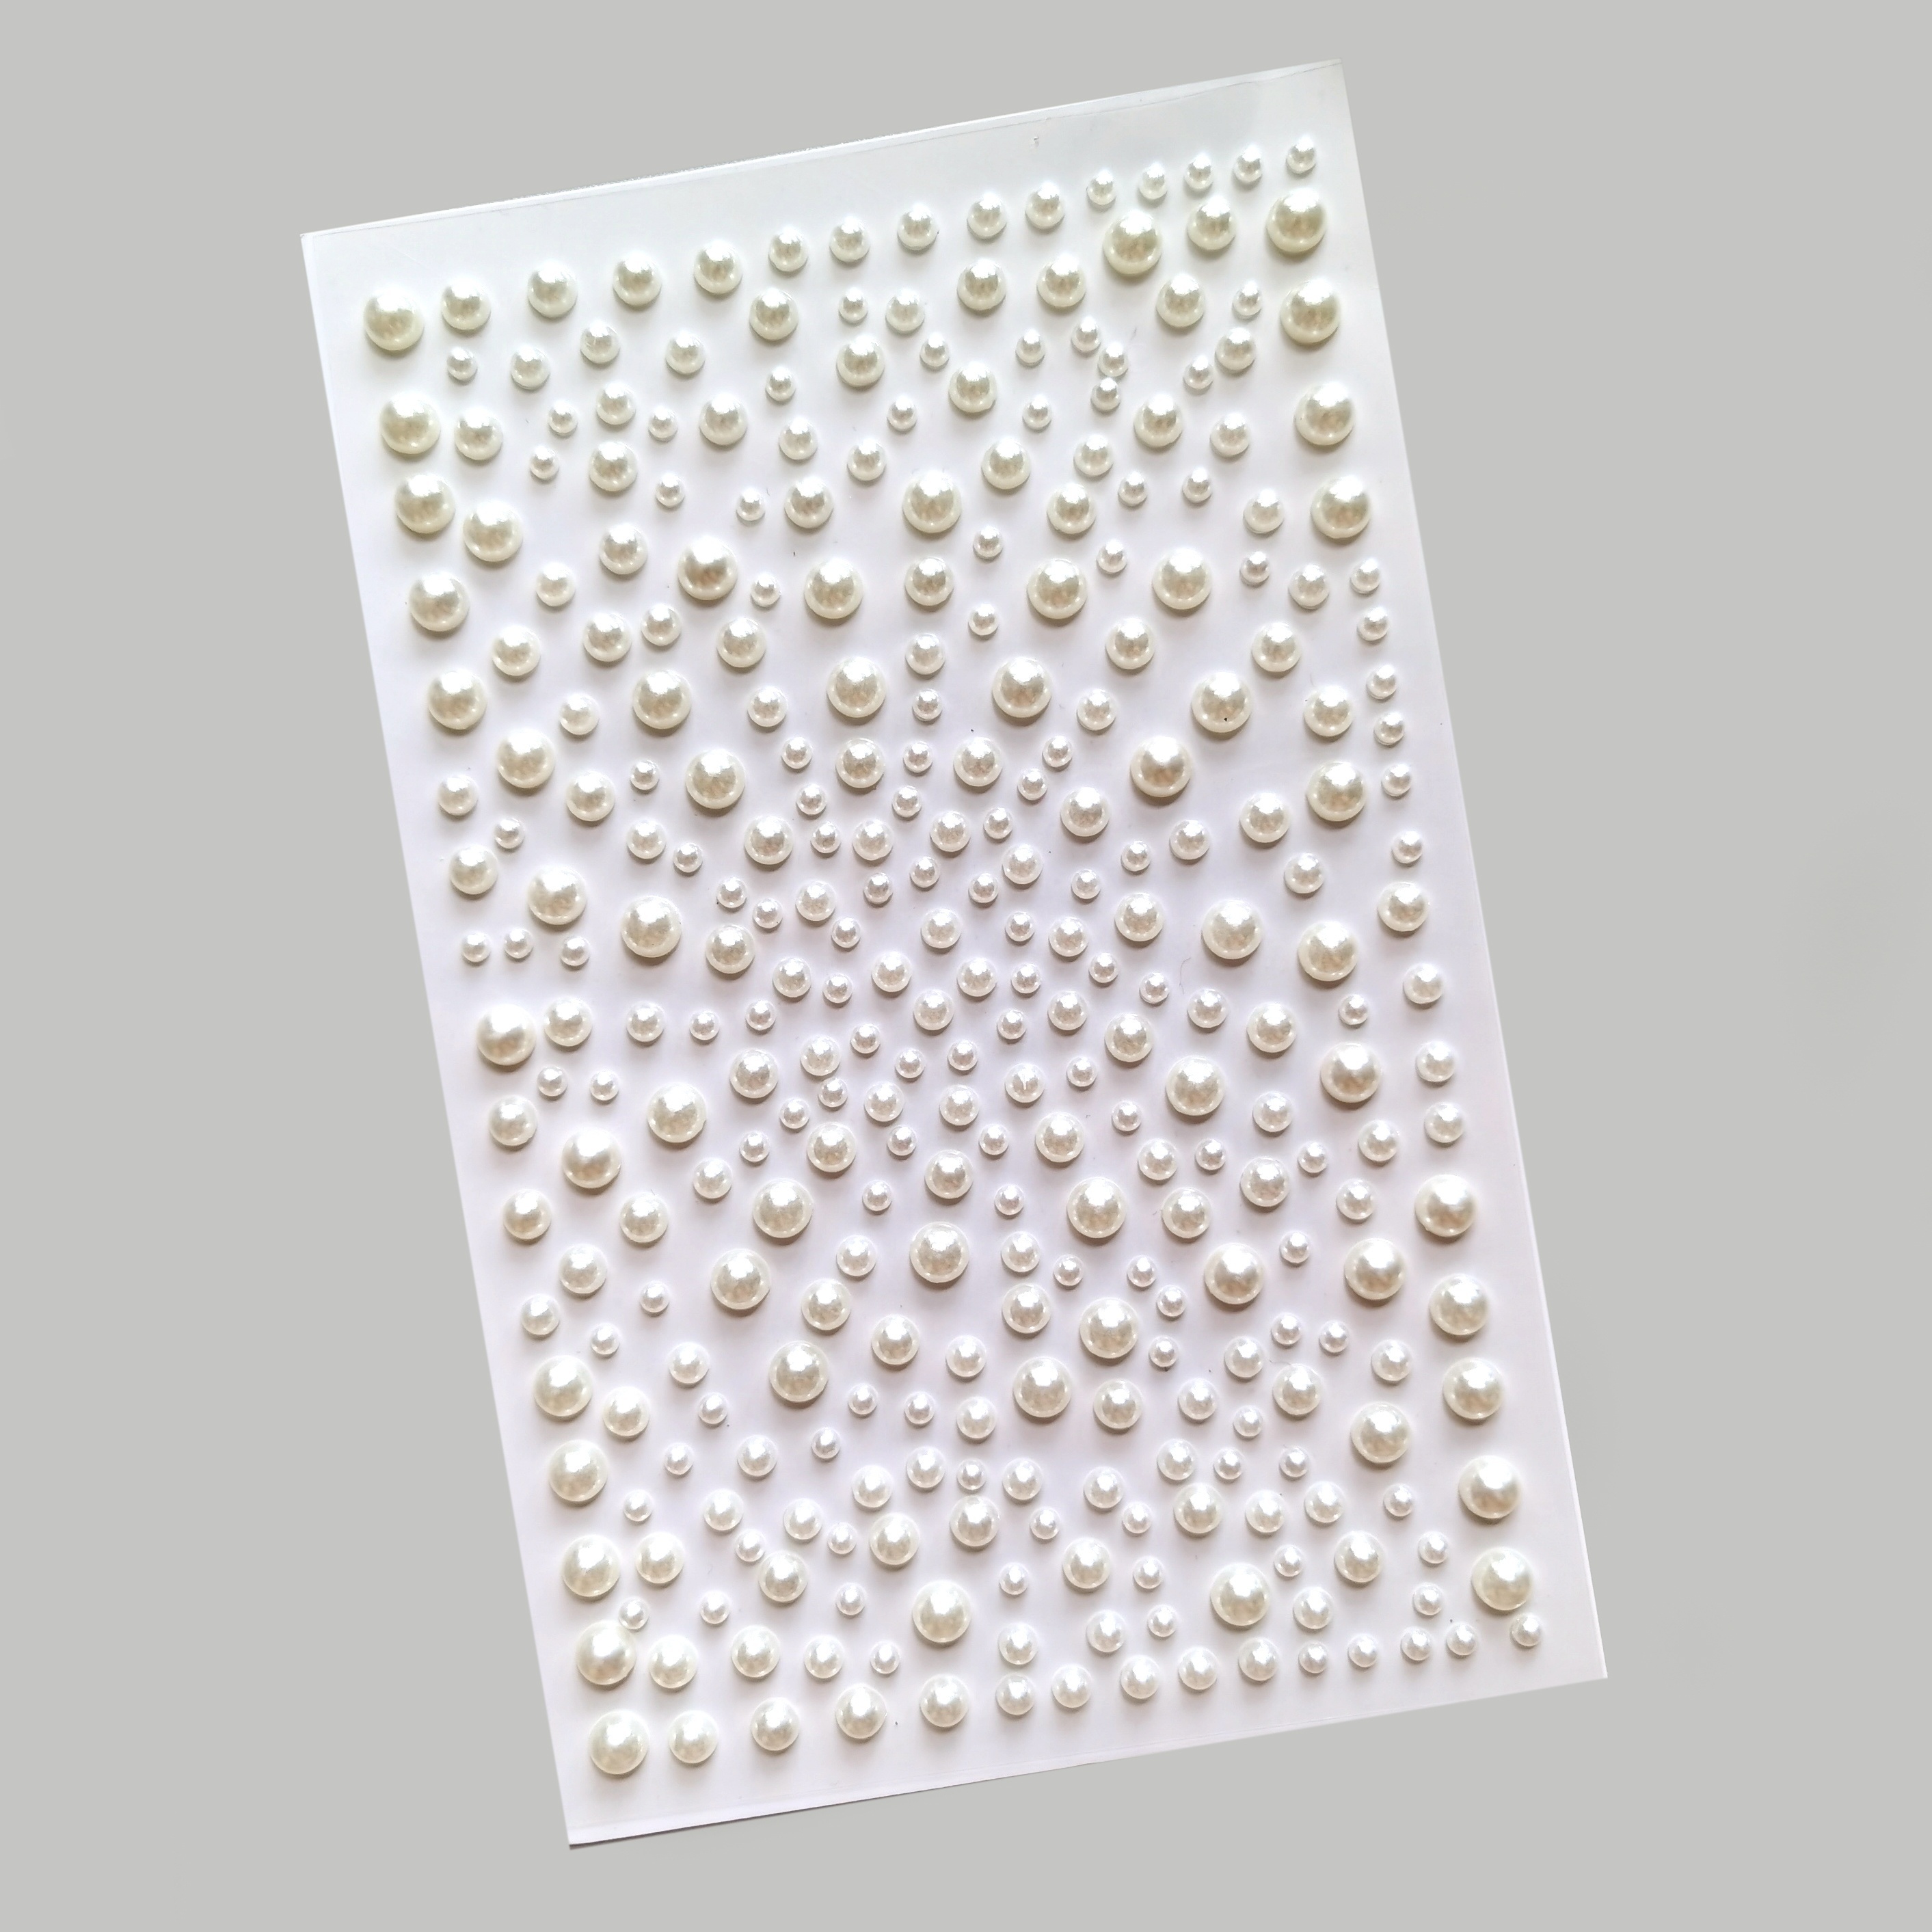 1650 Pcs Self Adhesive Pearl Stickers for Crafts Hair Face Makeup Nail Cell  Phone Decor, 3mm/4mm/5mm/6mm (White)